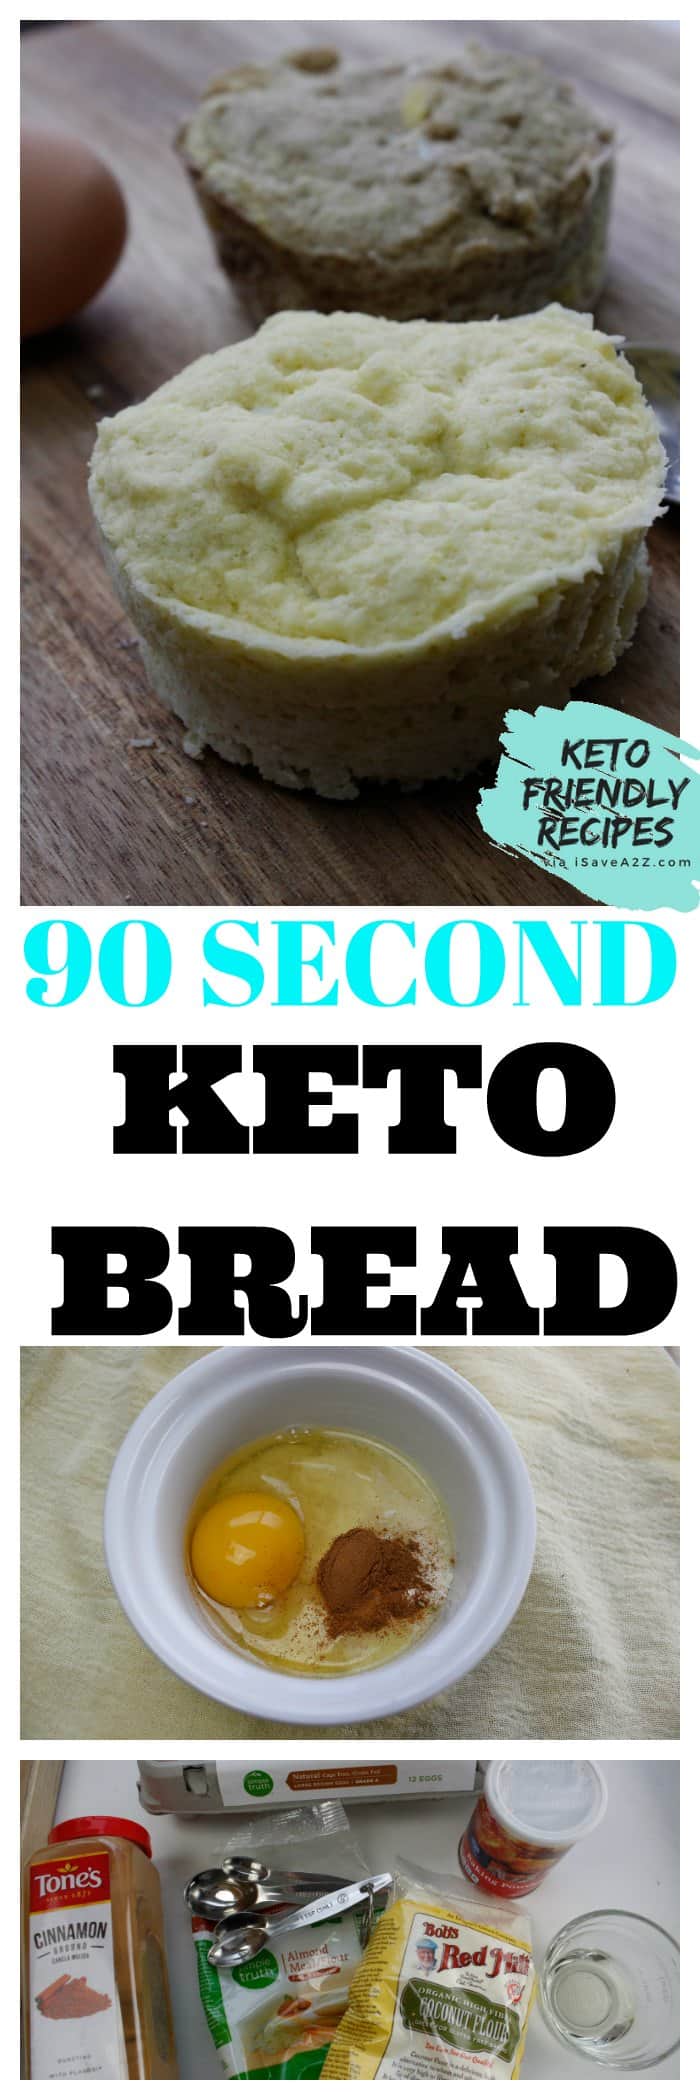 Keto 90 Second Bread Recipe done 2 different ways - Sweet or Savory!